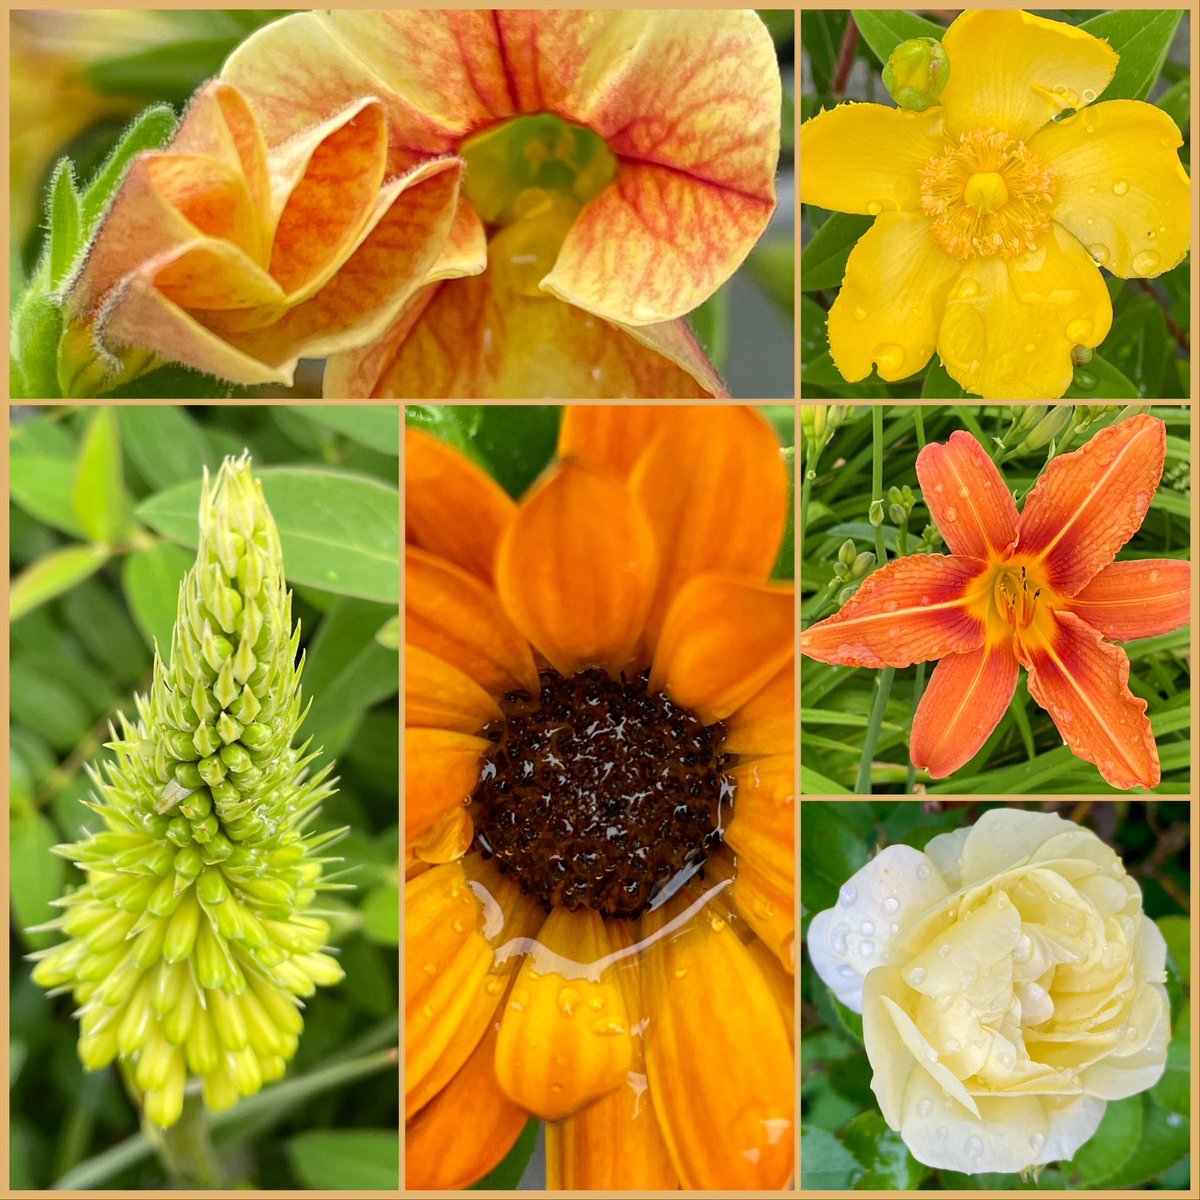 Yellow and orange take over in the garden and shine against the grey of the rain.☔️With these six rather wet beauties, I wish you a wonderful weekend and some sunshine too!🌞#SixOnSaturday